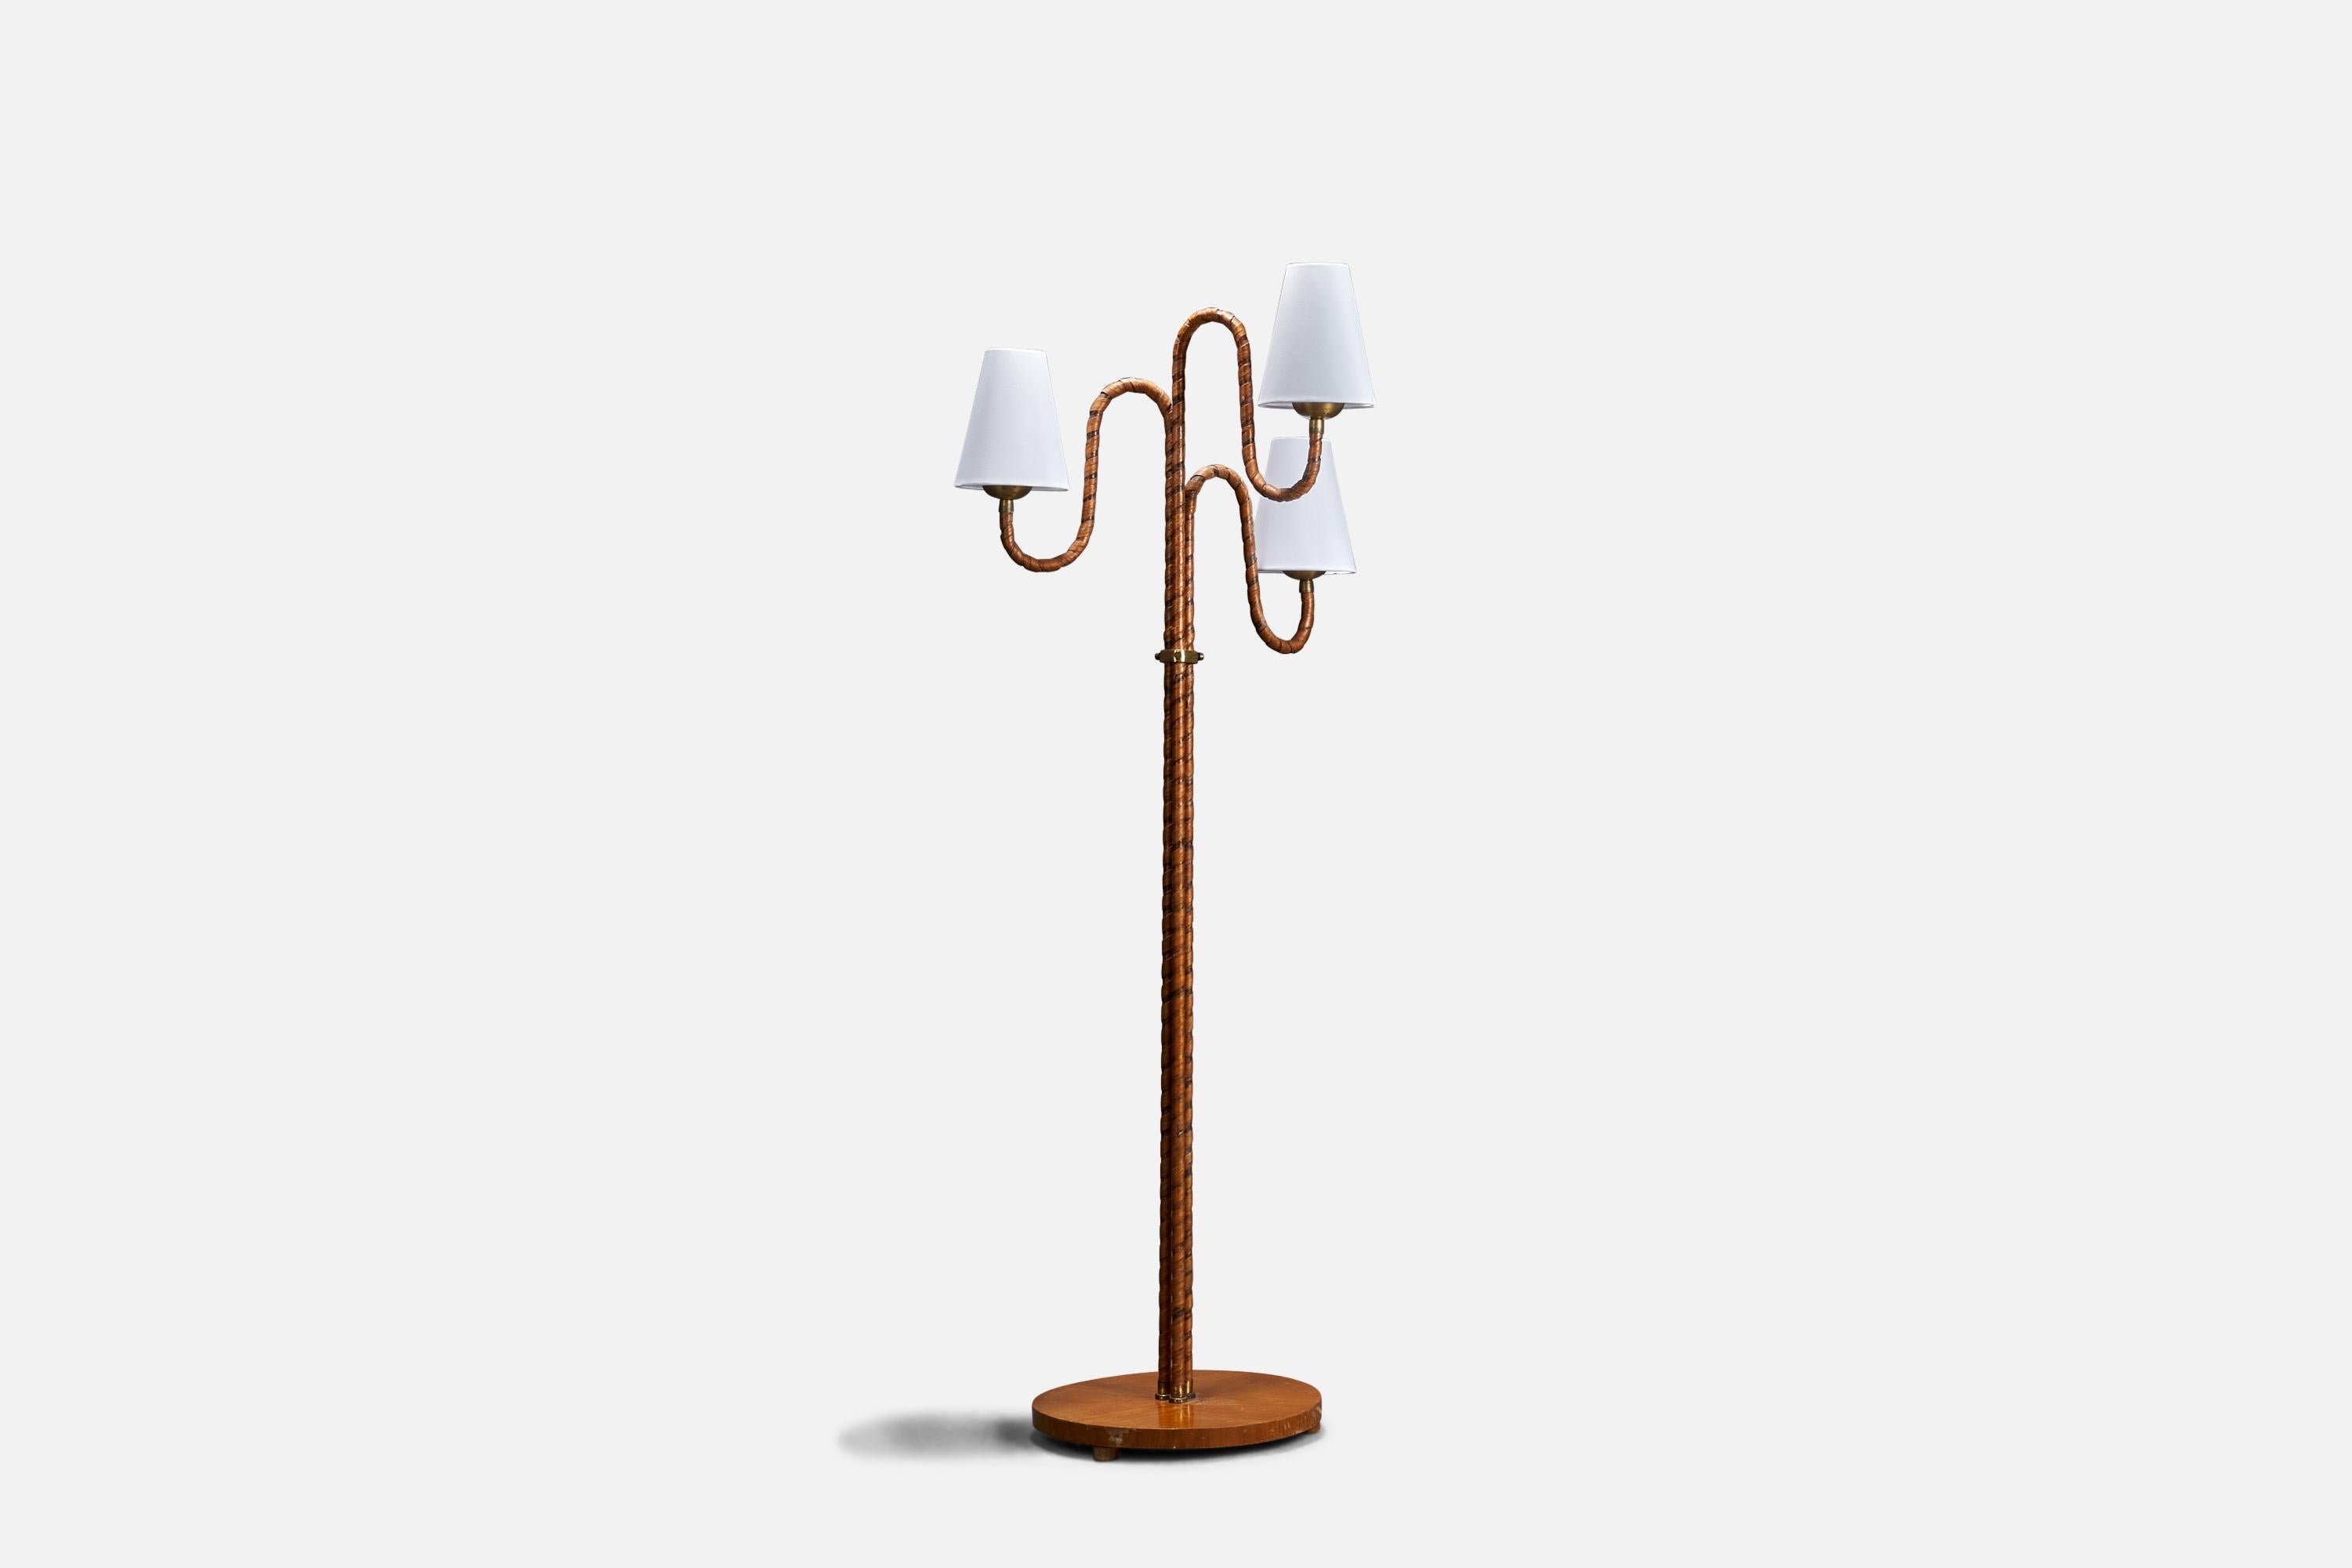 A wood, veneer and brass floor lamp designed and produced in Sweden, 1930s.

Sold with Lampshades. 
Dimensions stated are of Floor Lamp with Lampshades. 

Sockets take standard E-26 medium base bulbs.

There is no maximum wattage stated on